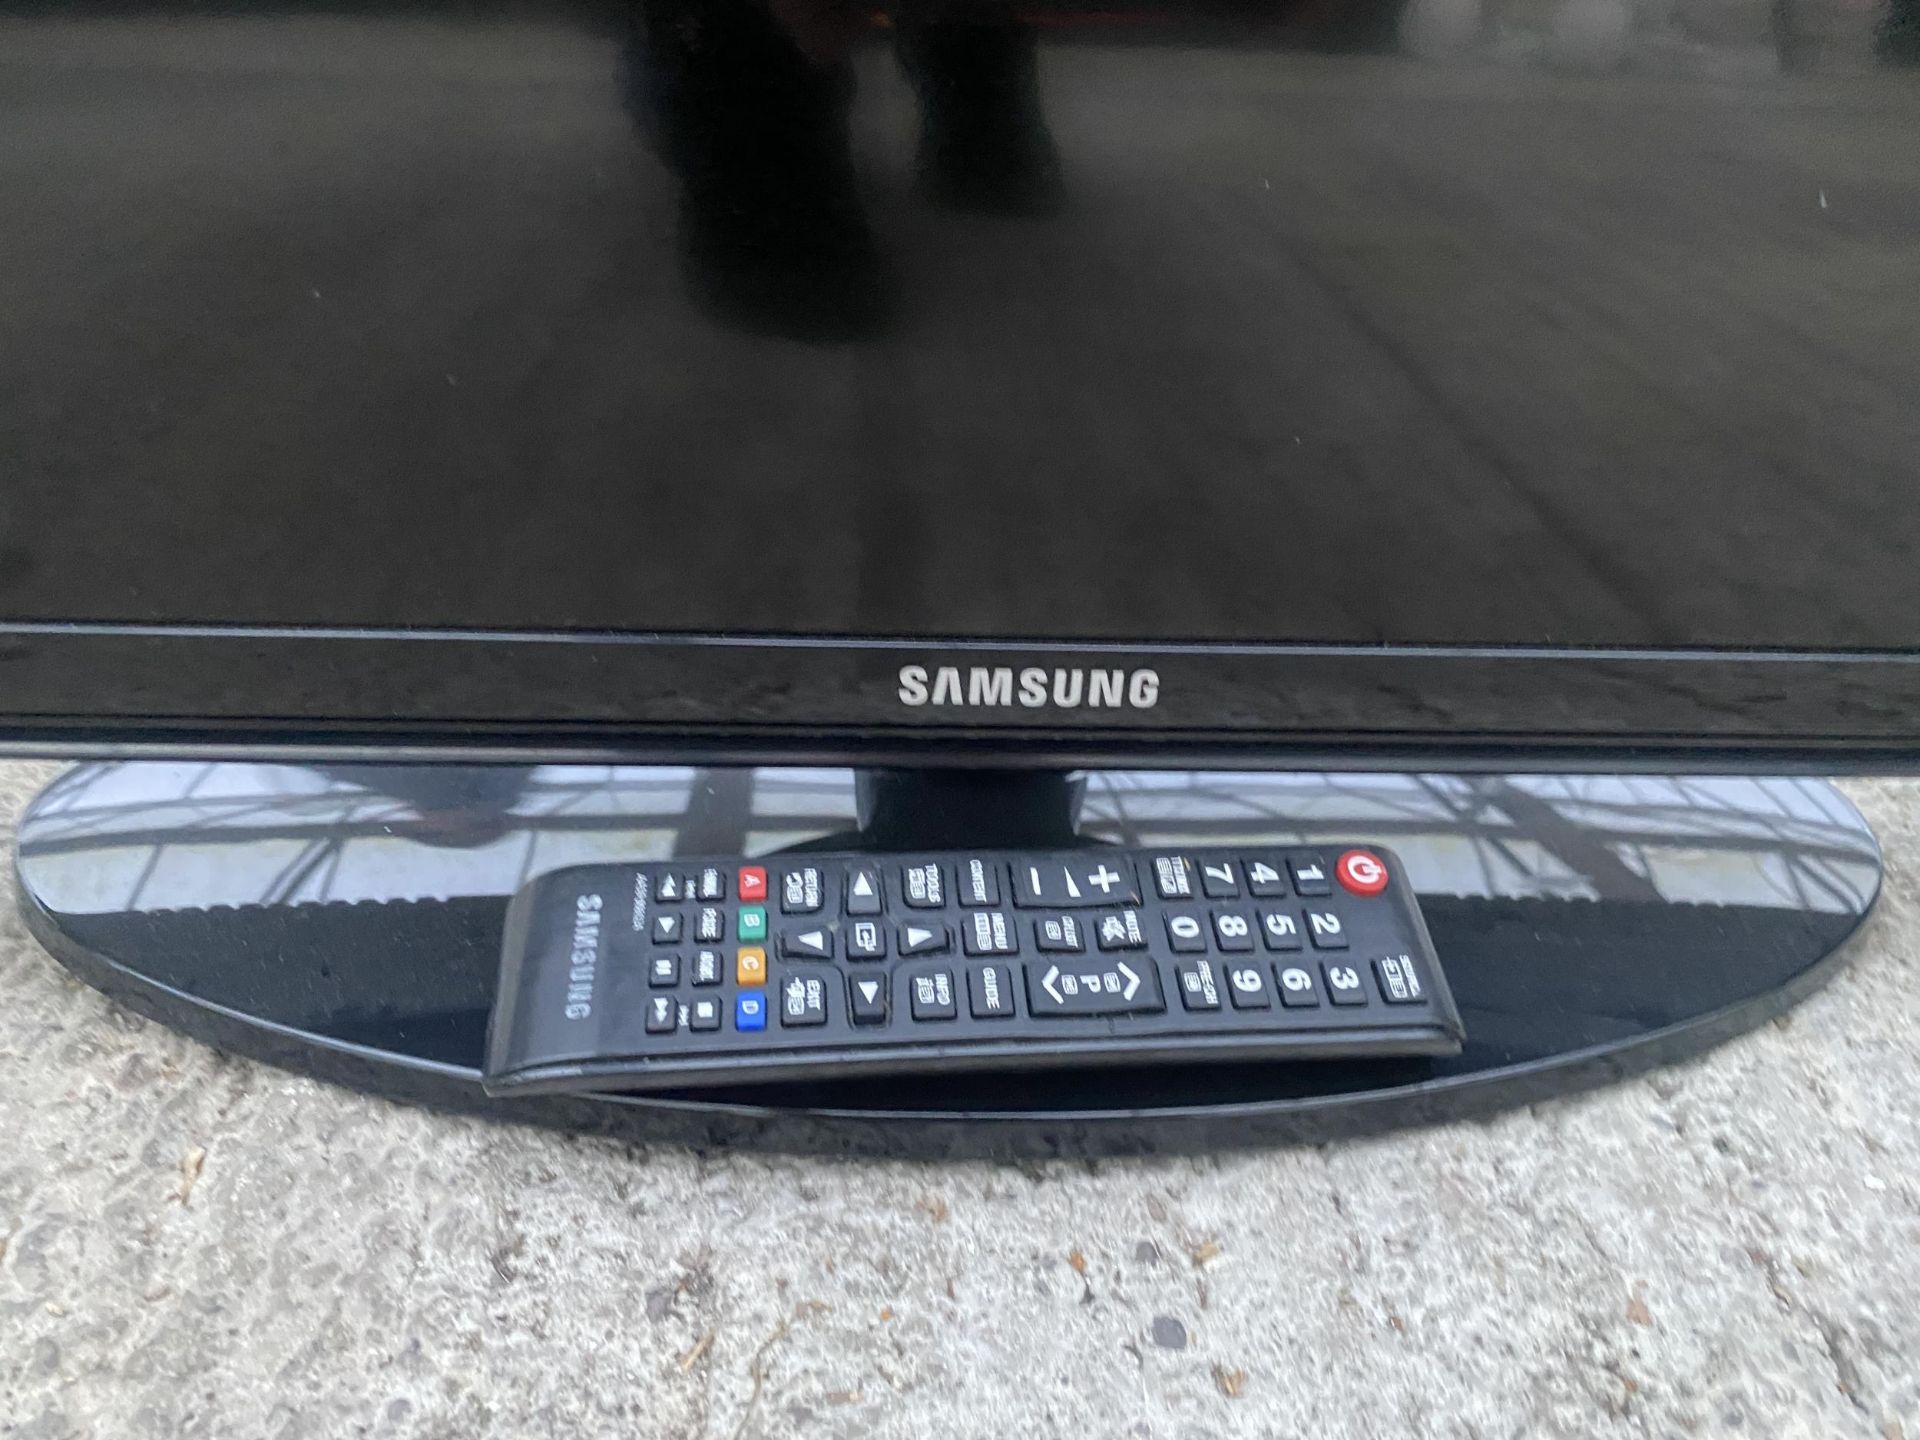 A SAMSUNG 32" TELEVISION WITH REMOTE CONTROL - Image 2 of 2